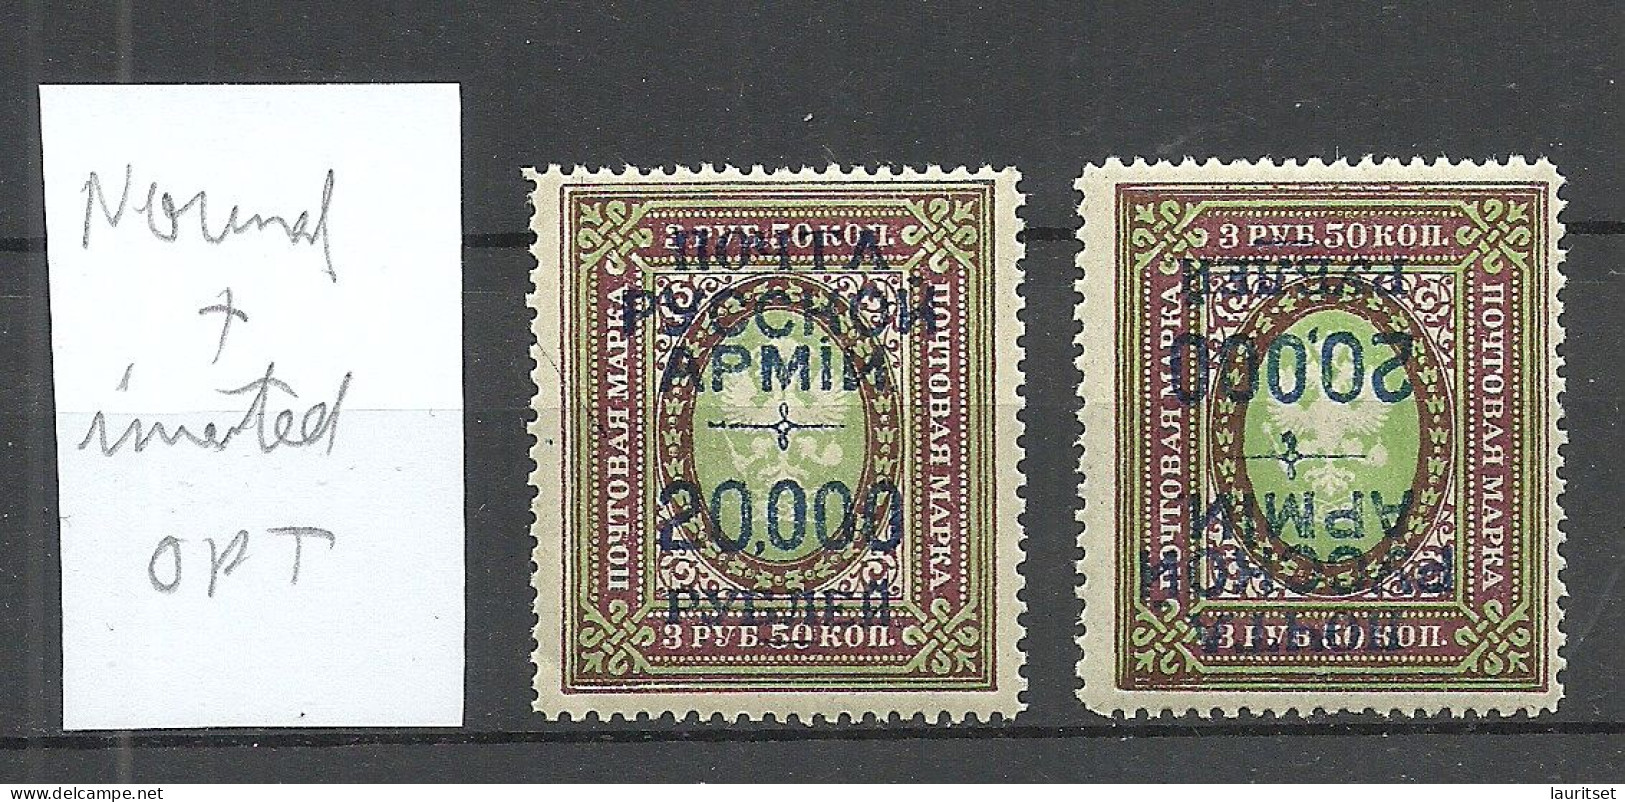 Russia RUSSLAND 1920 Civil War Wrangel Army Camp Post At Gallipoli 20 000 On 3,50 R. Perforated, Normal + INVERTED OPT * - Wrangel Leger